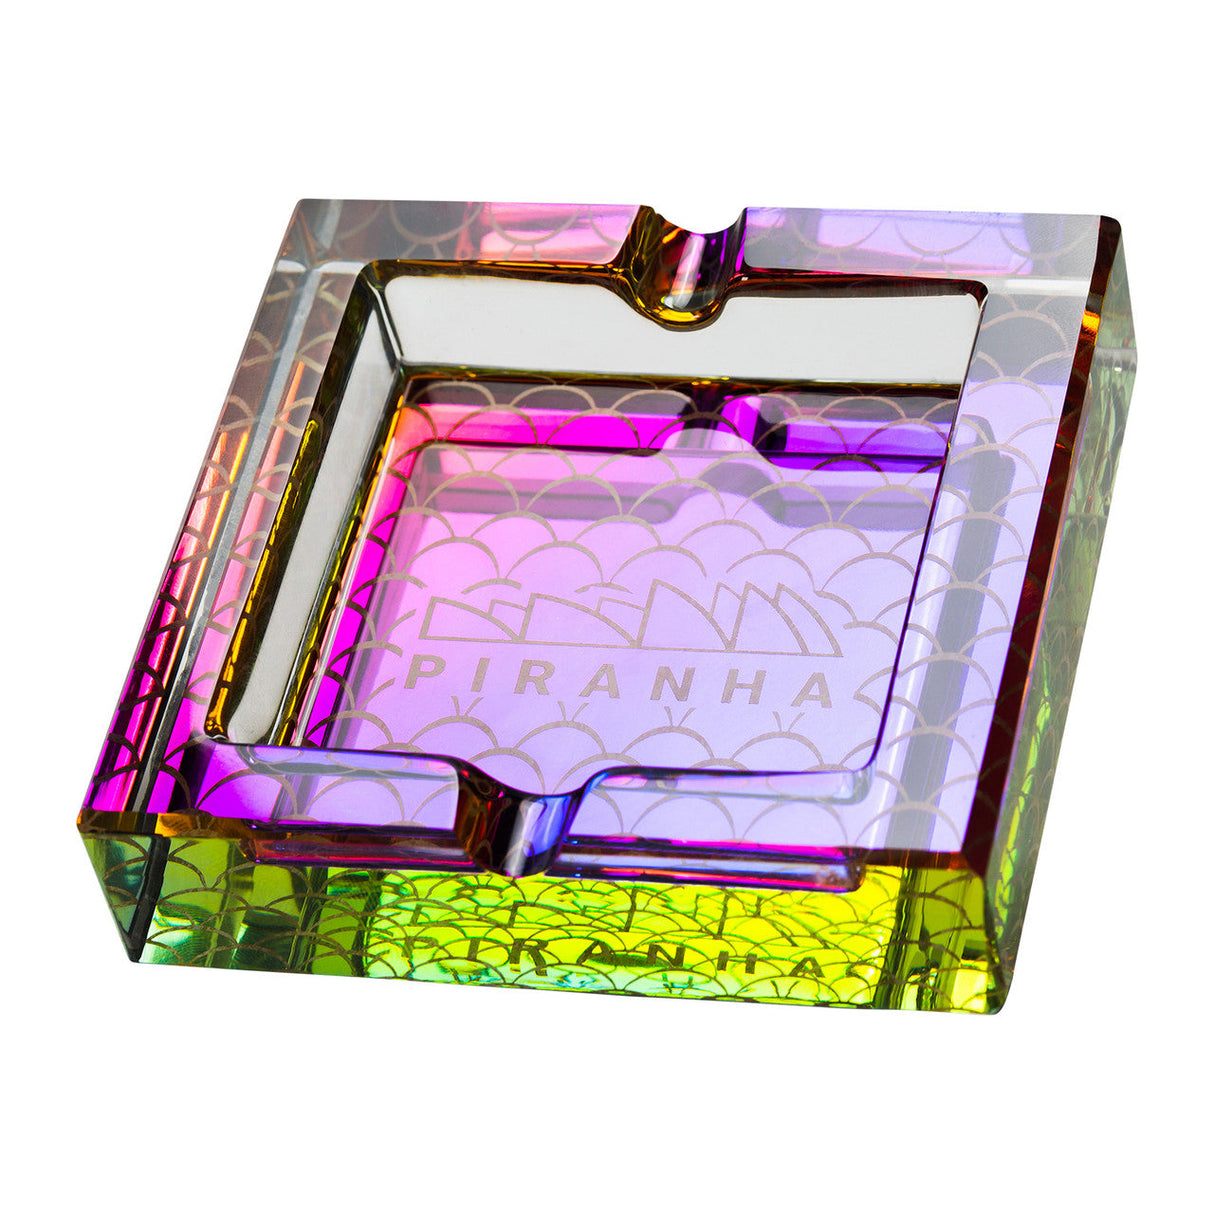 Piranha Glass Square Ashtray with Chroma Rainbow Finish and Scales Pattern, Top View